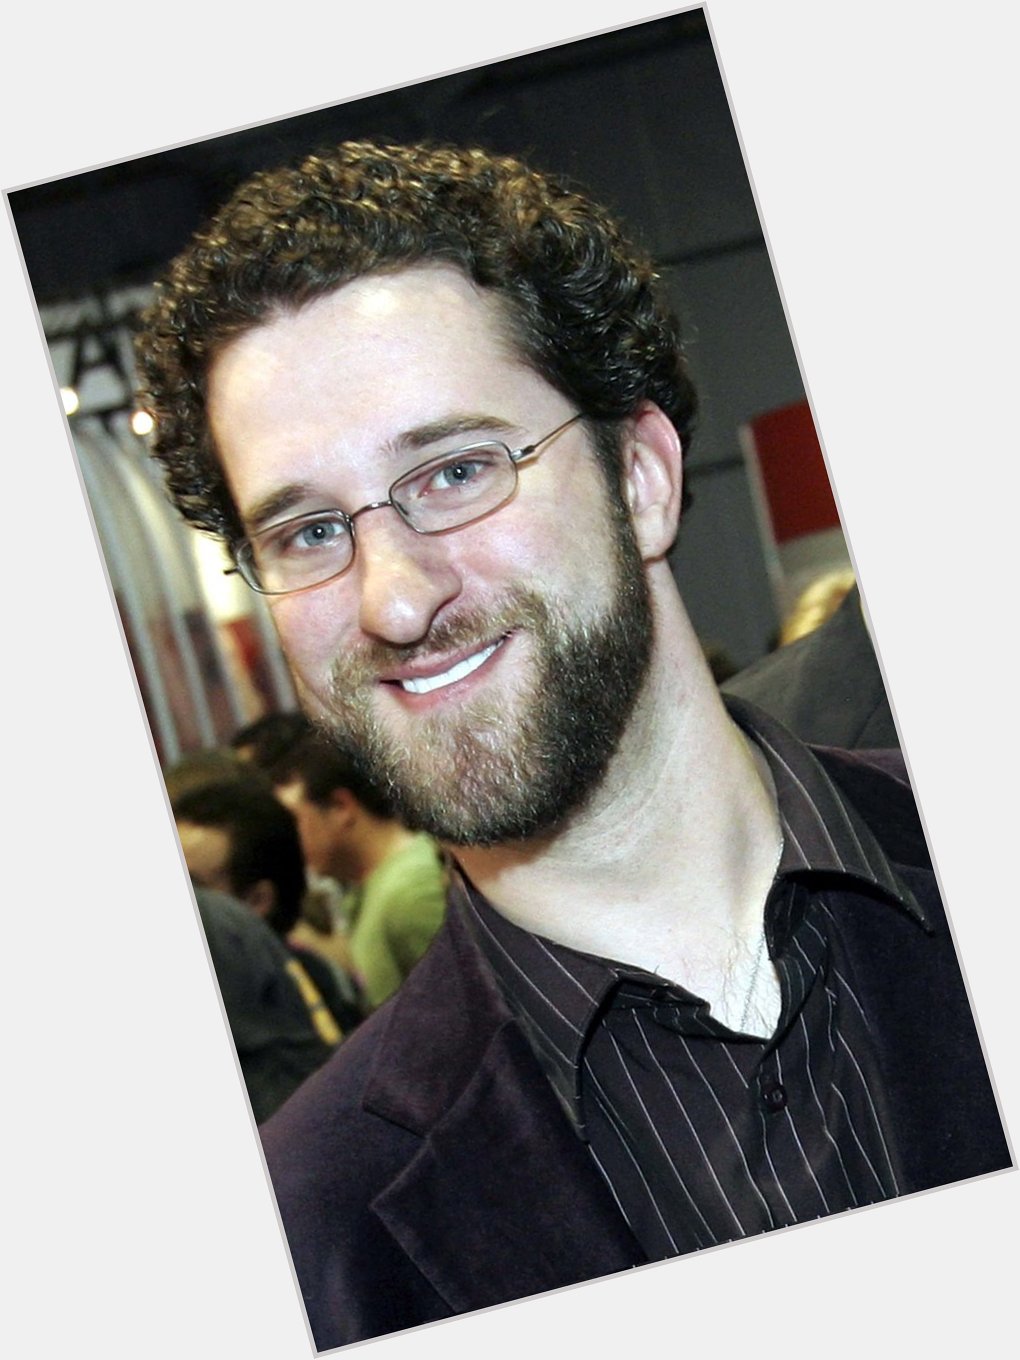 Happy Birthday to the late Dustin Diamond who would\ve turned 45 today - Screech from Saved by the Bell 